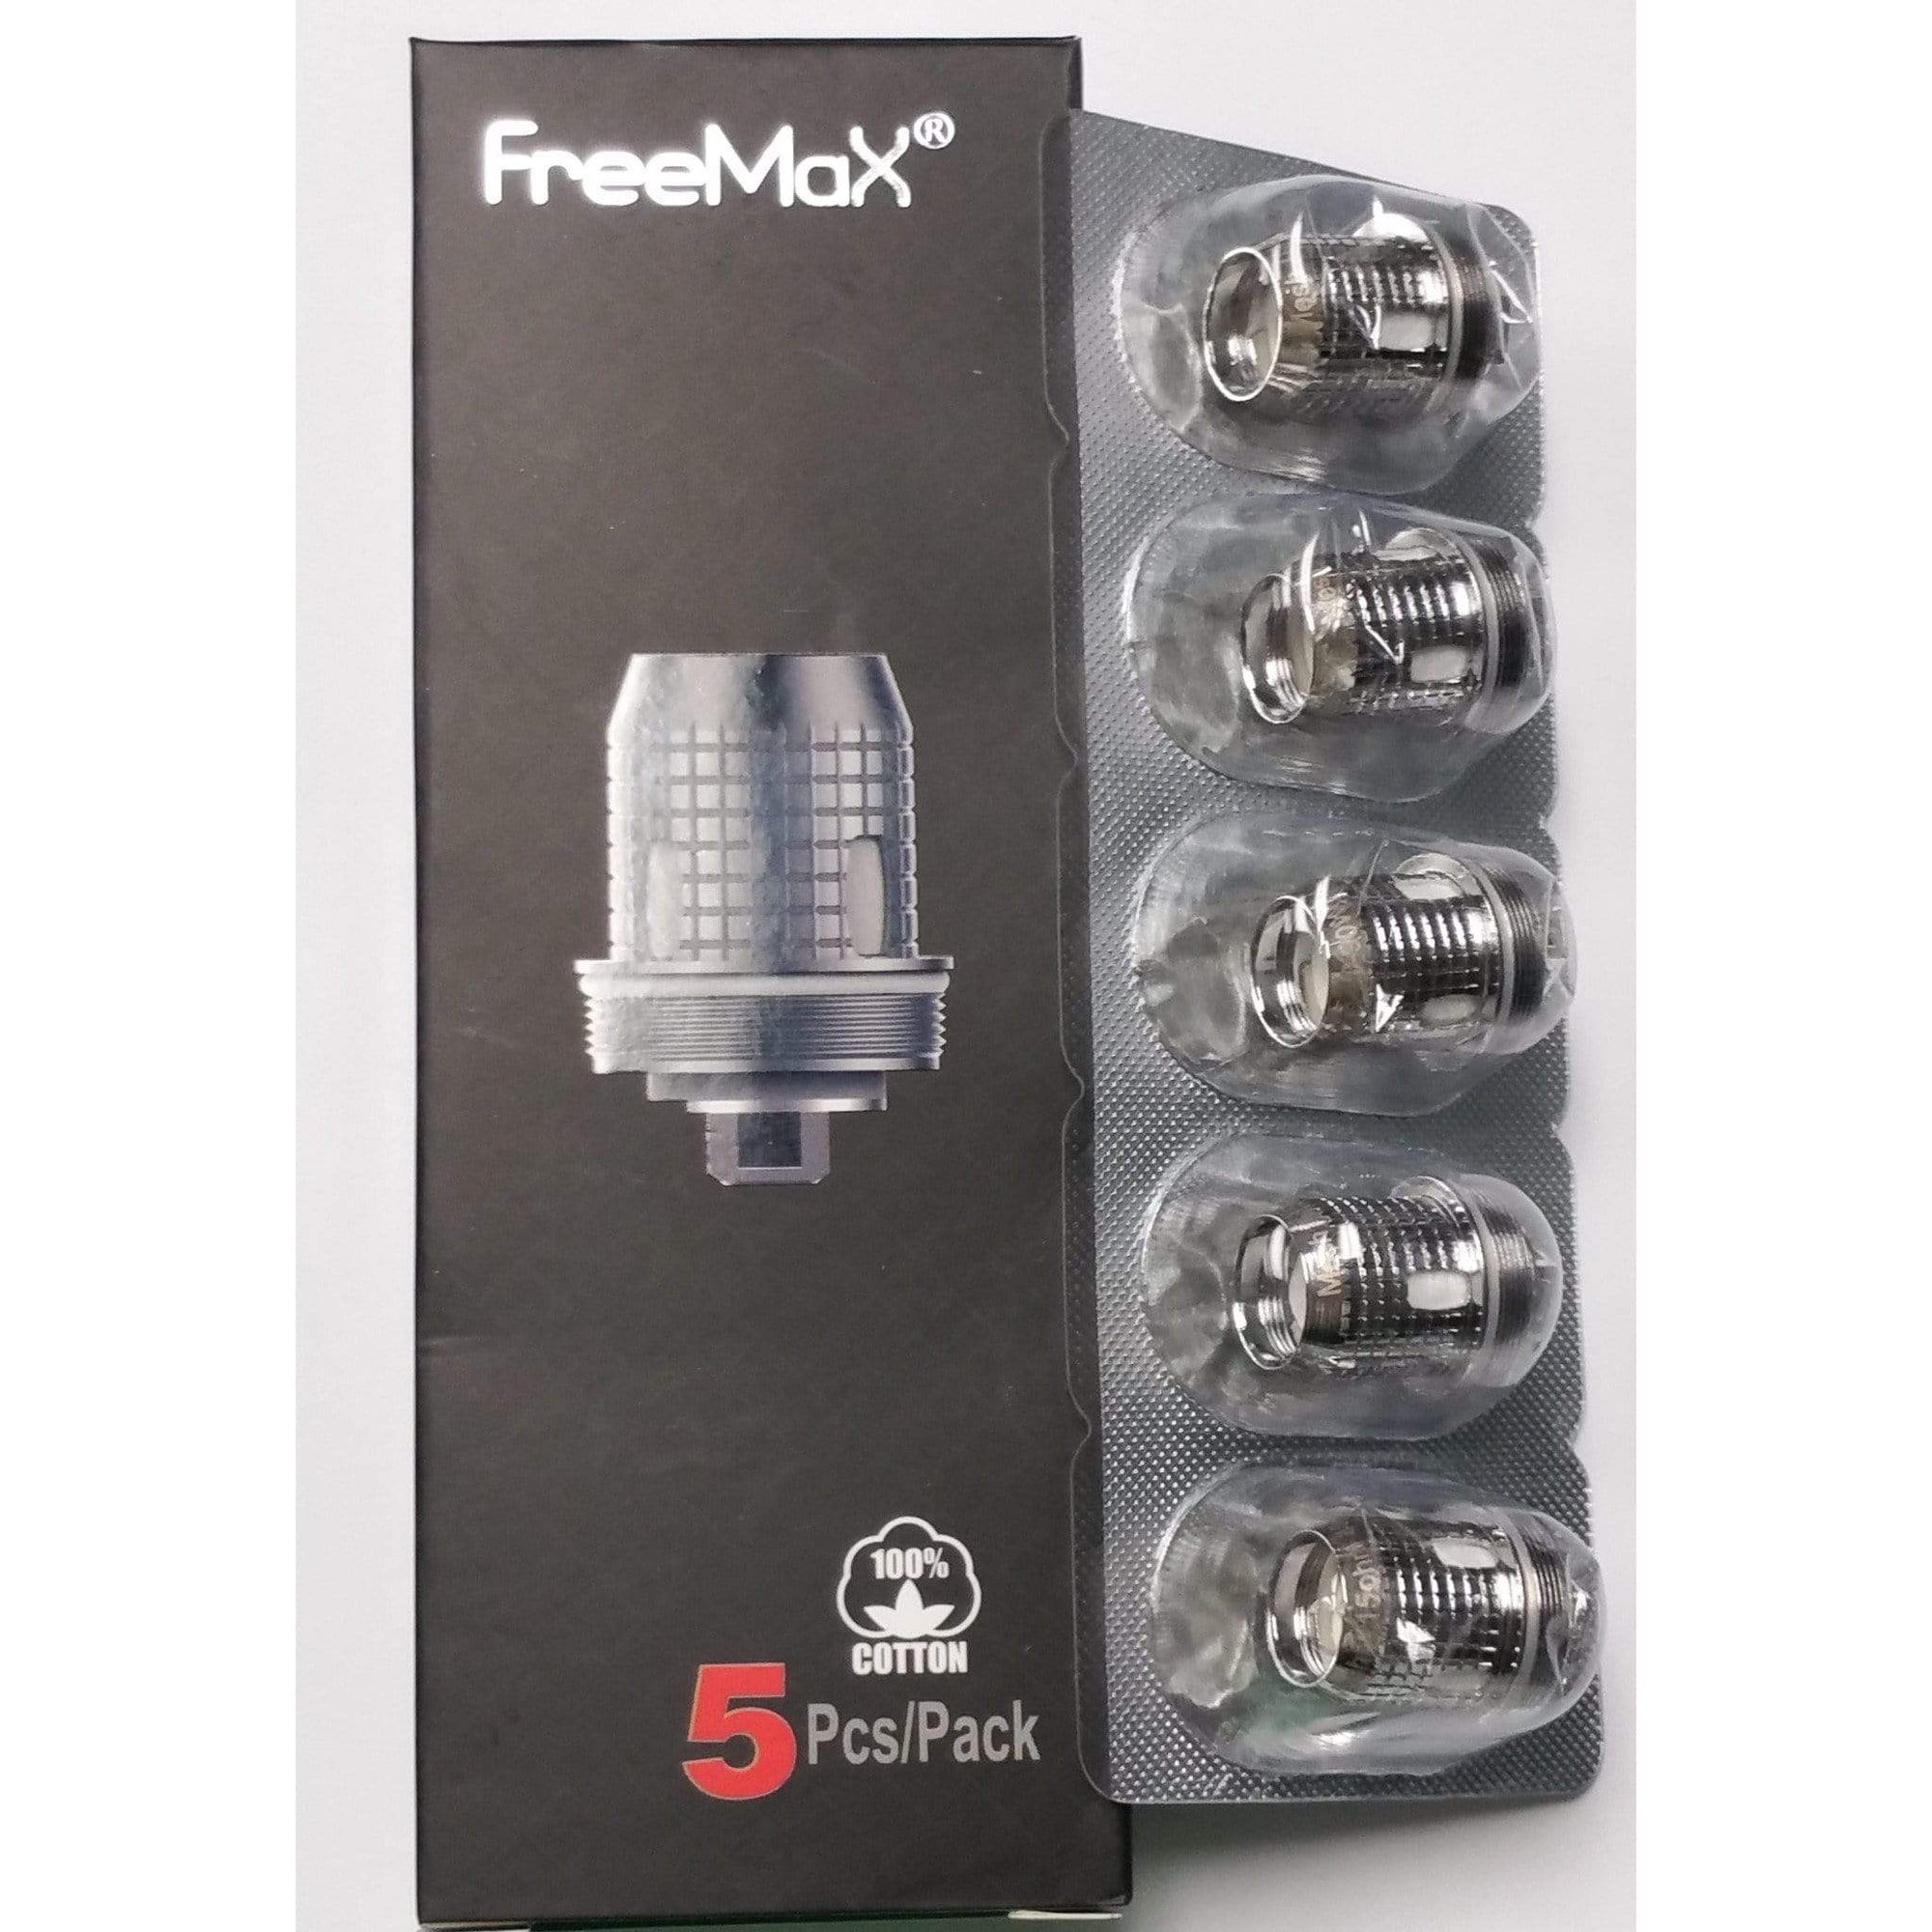 Freemax Fireluke Mesh Replacement Coils Replacement Coils